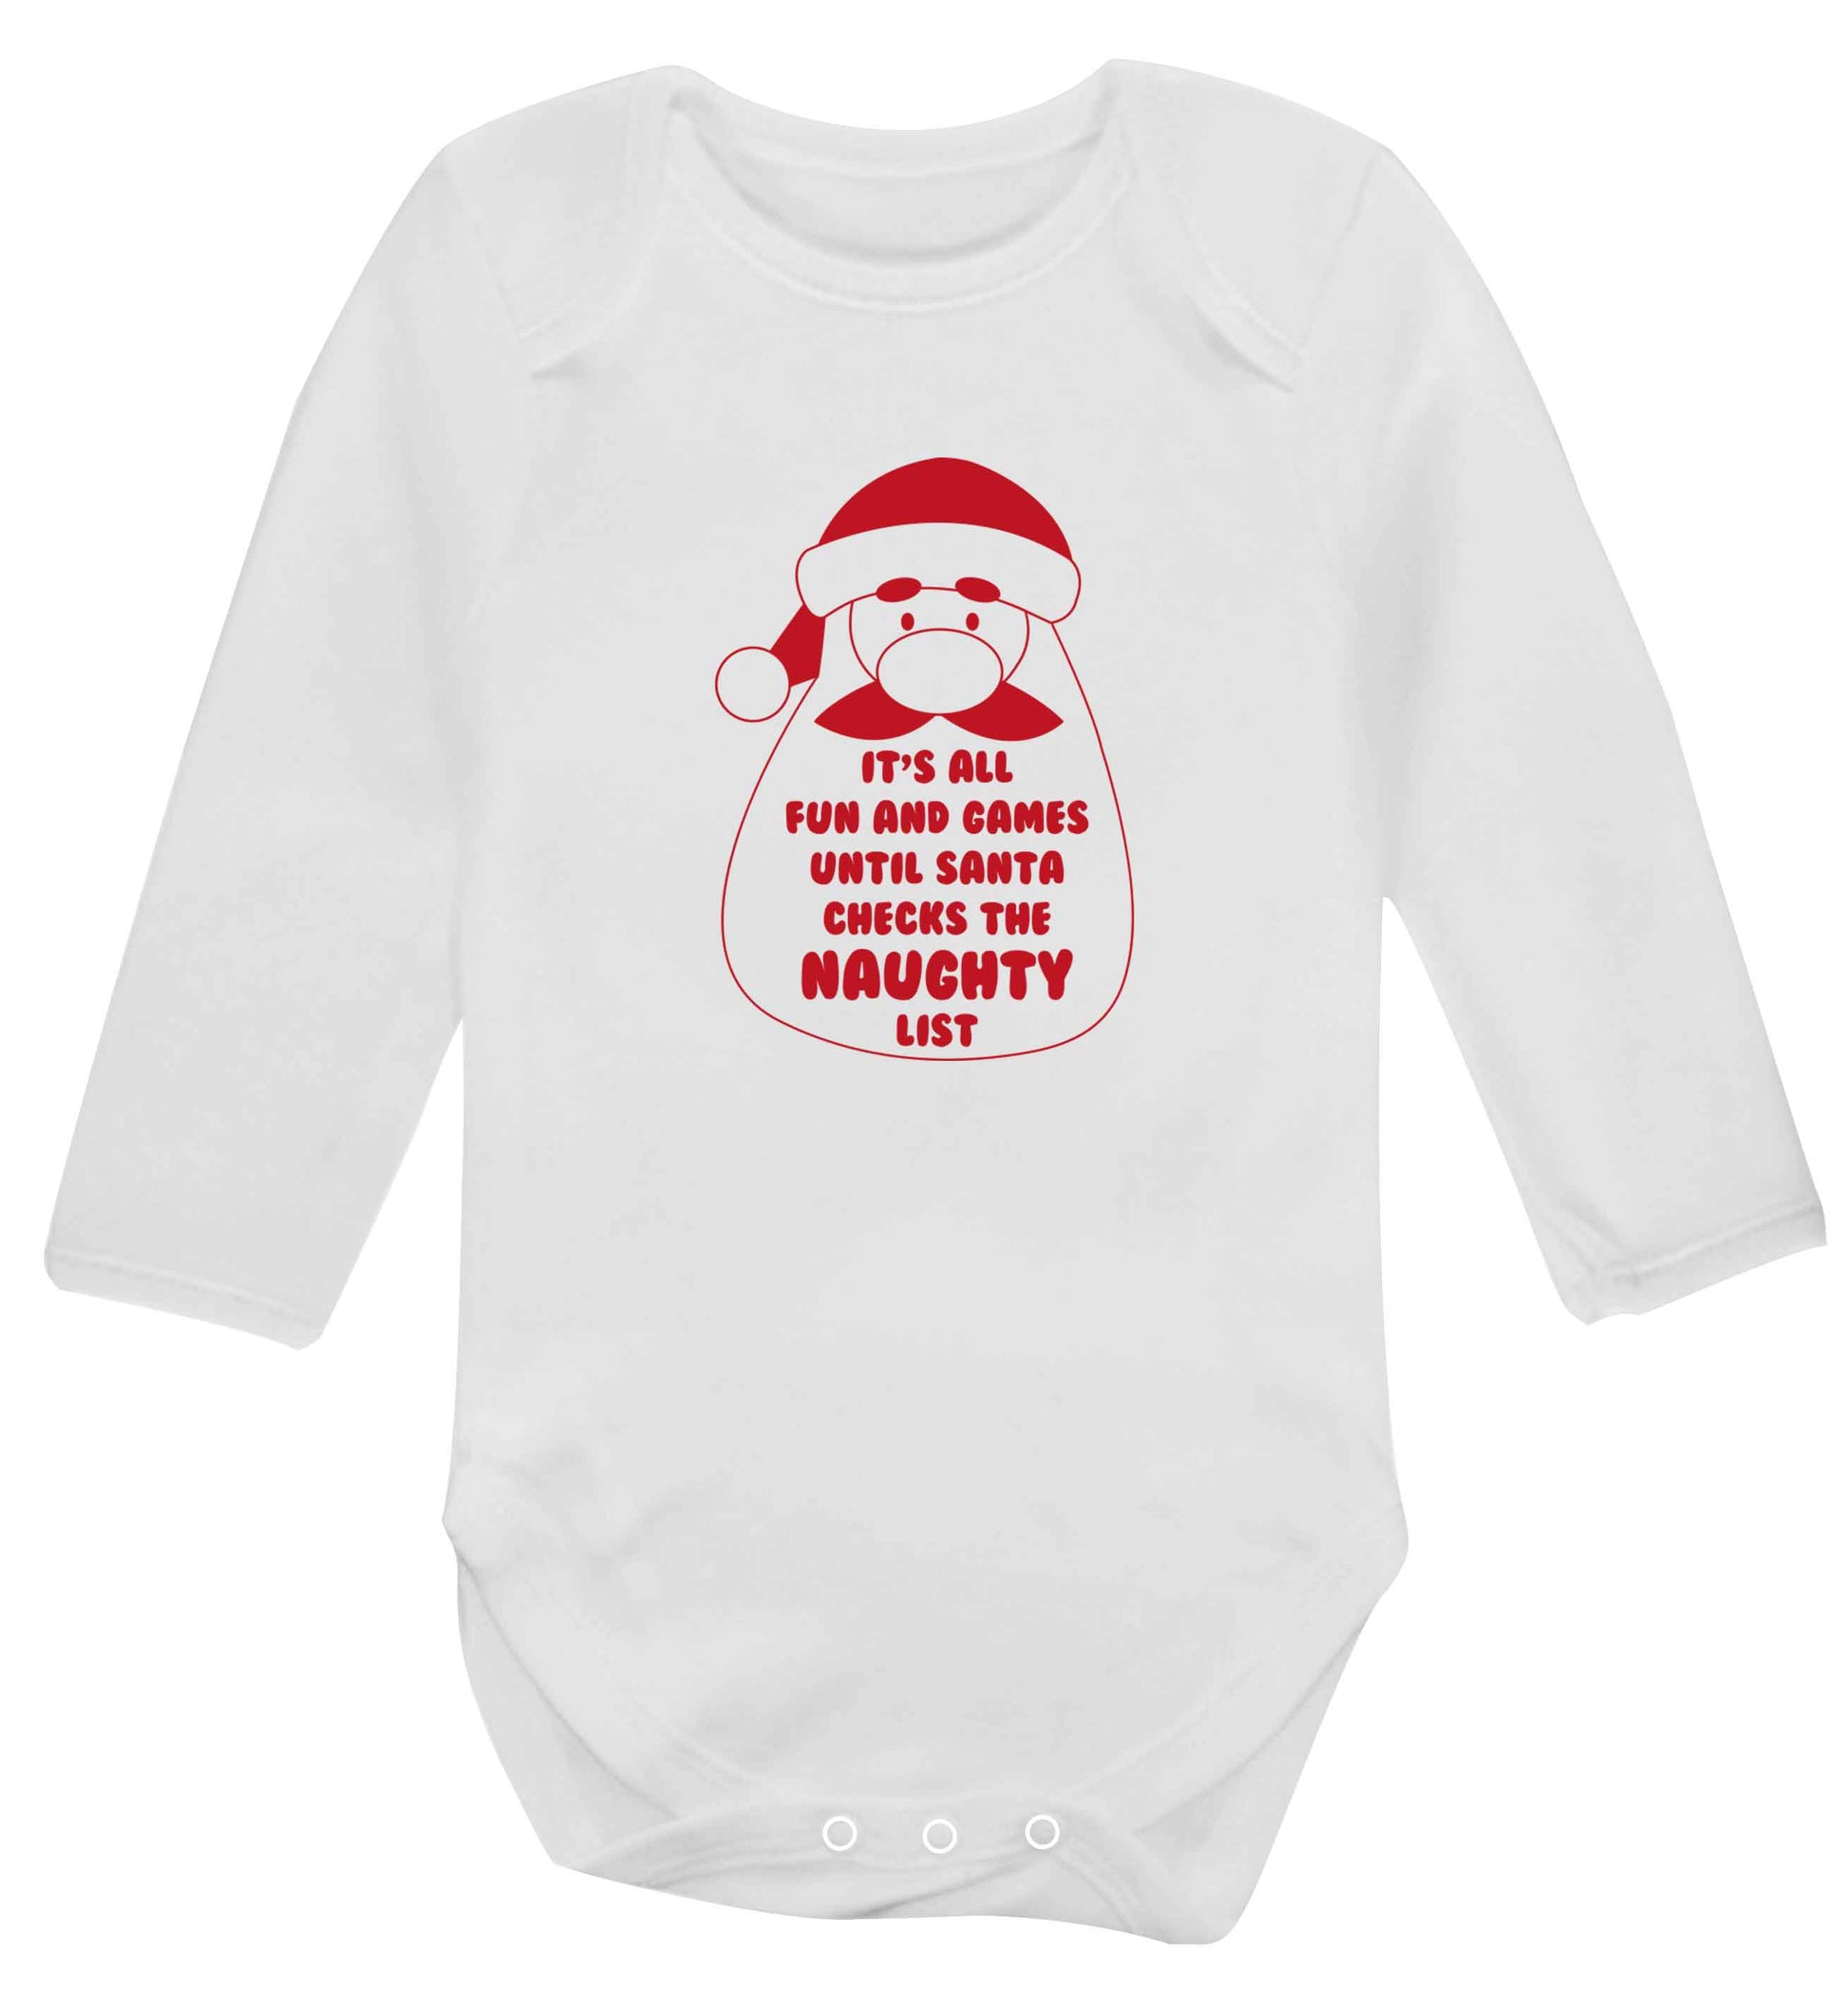 It's all fun and games until Santa checks the naughty list baby vest long sleeved white 6-12 months